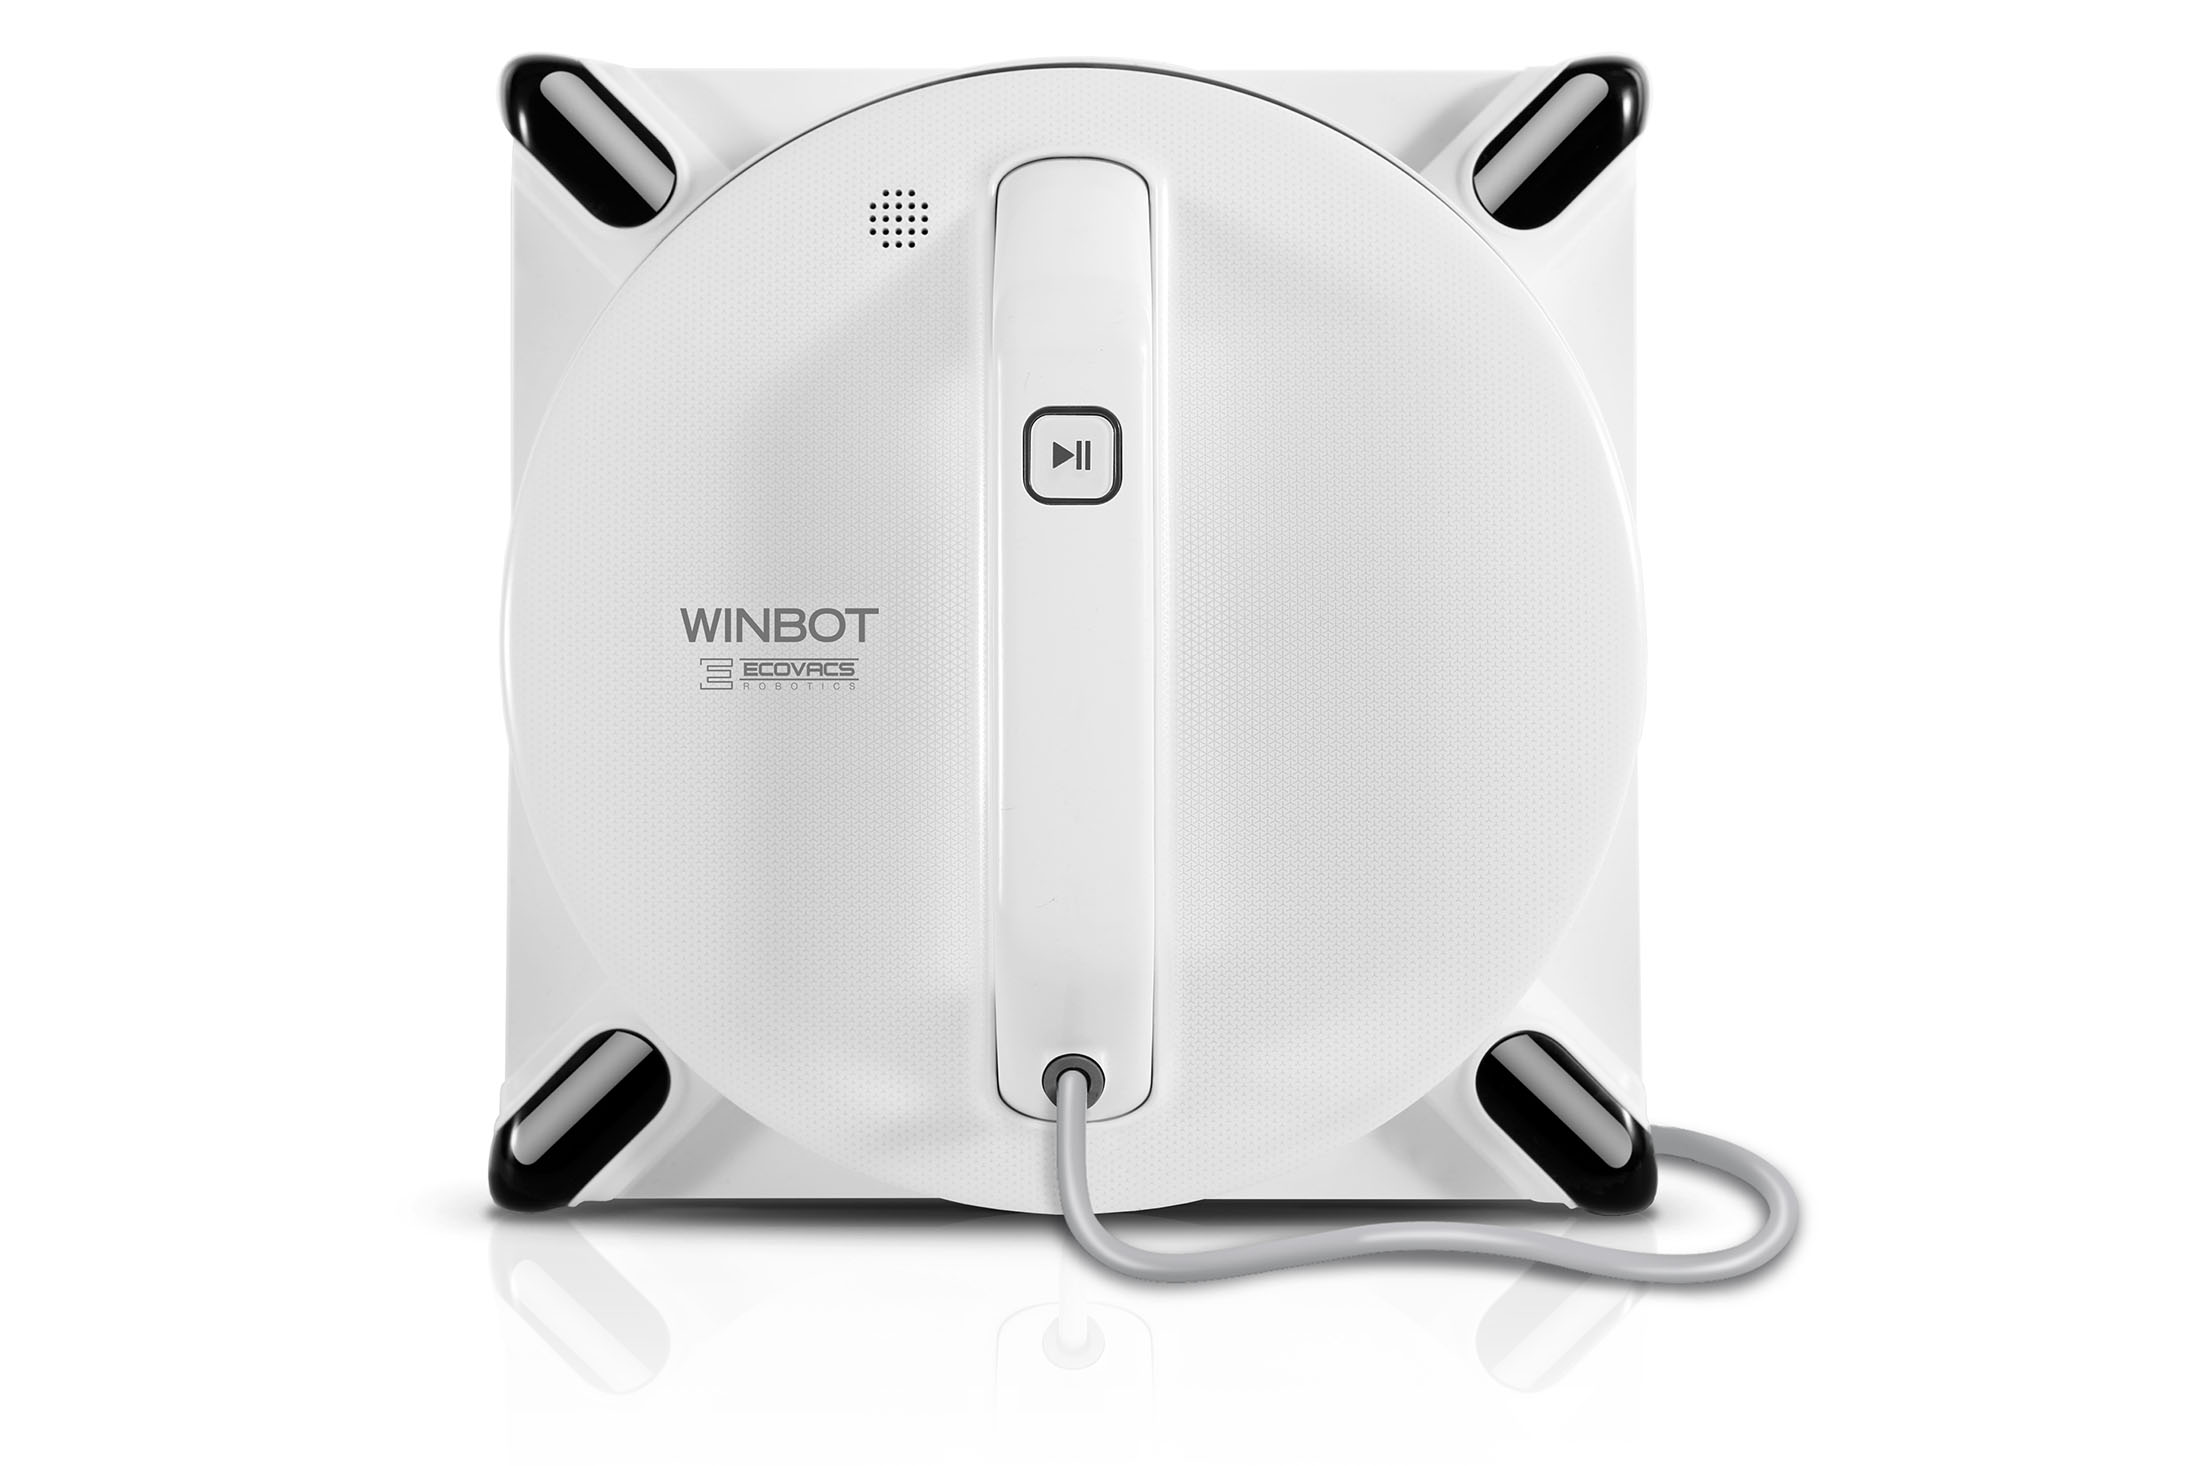 Ecovacs Winbot W1 Pro window cleaner: Good enough to replace human